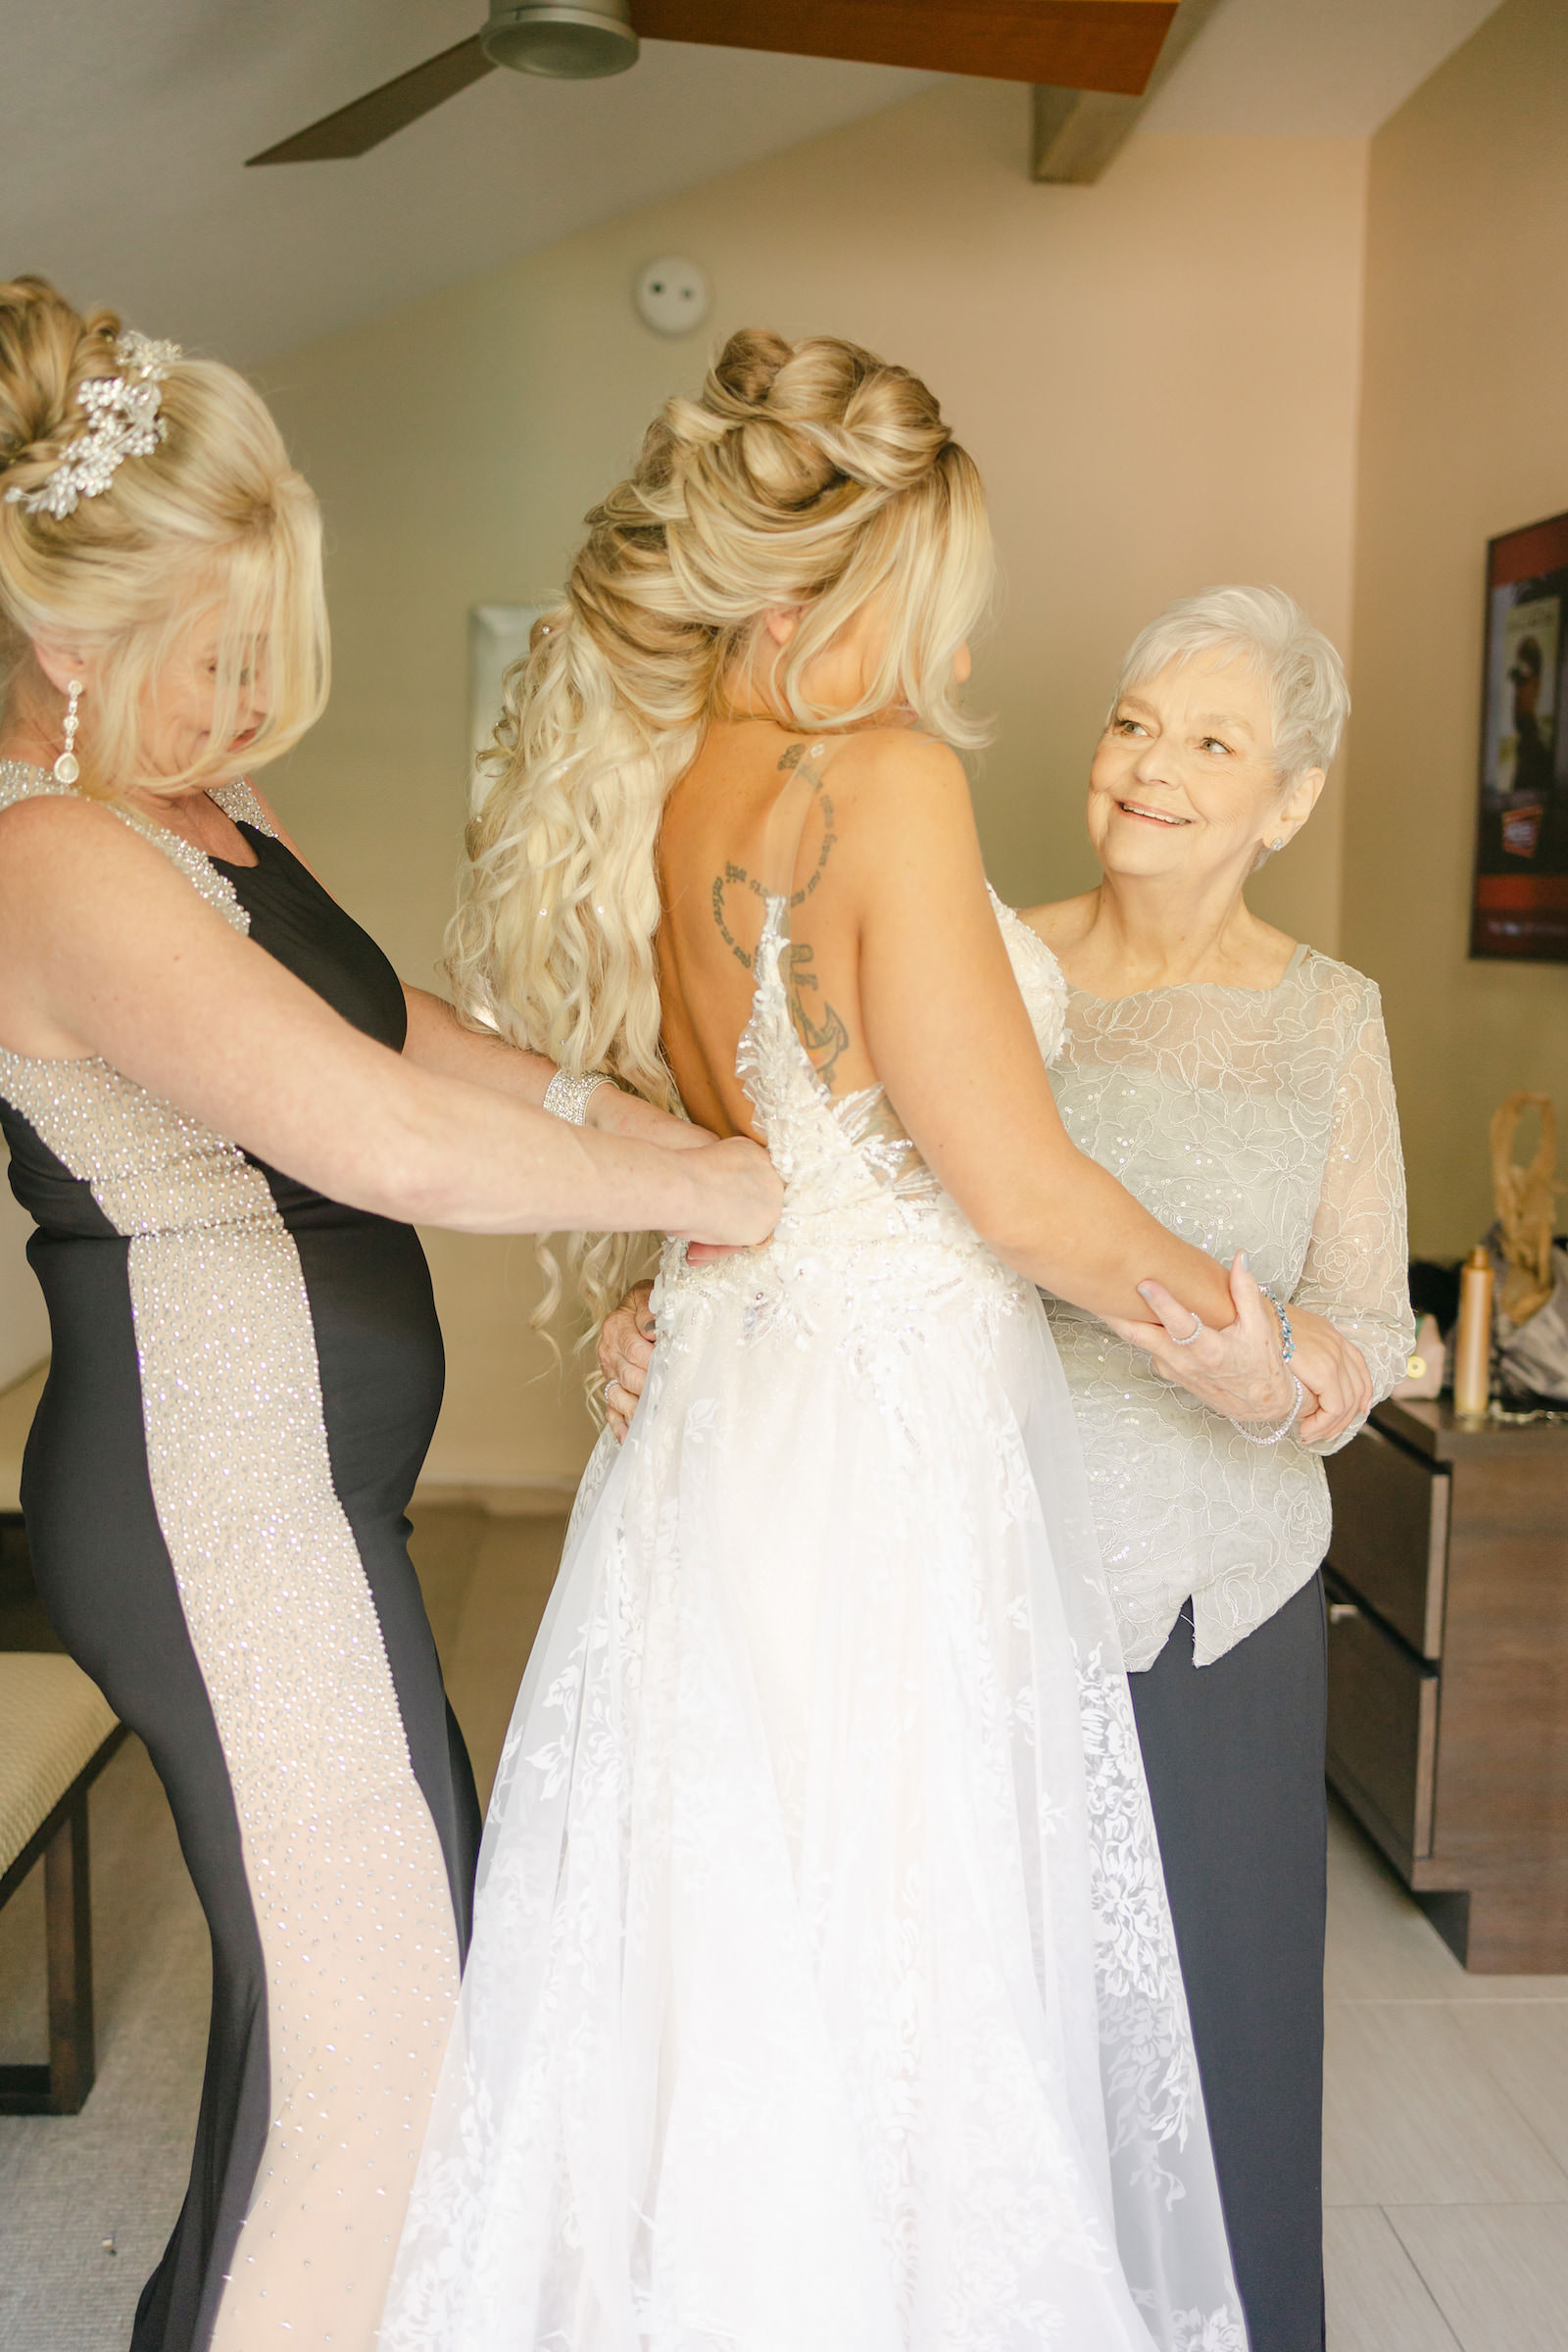 Bride Getting Wedding Ready Getting Dress Buttoned Up with Mom and Grandmother